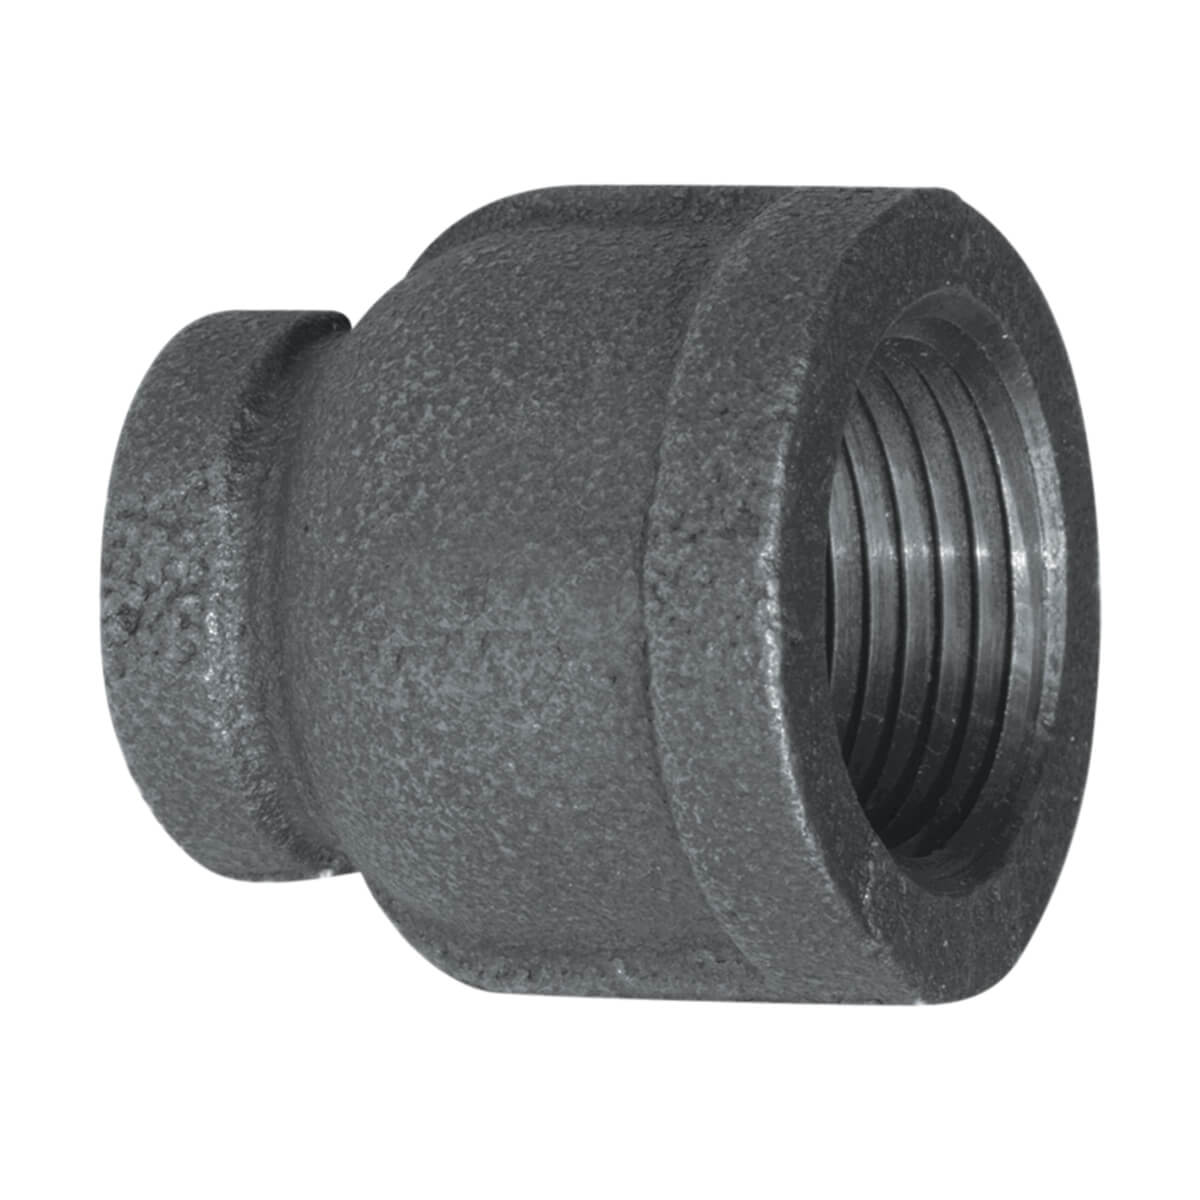 Fitting Black Iron Reducer Coupling - 1-in x 1/2-in